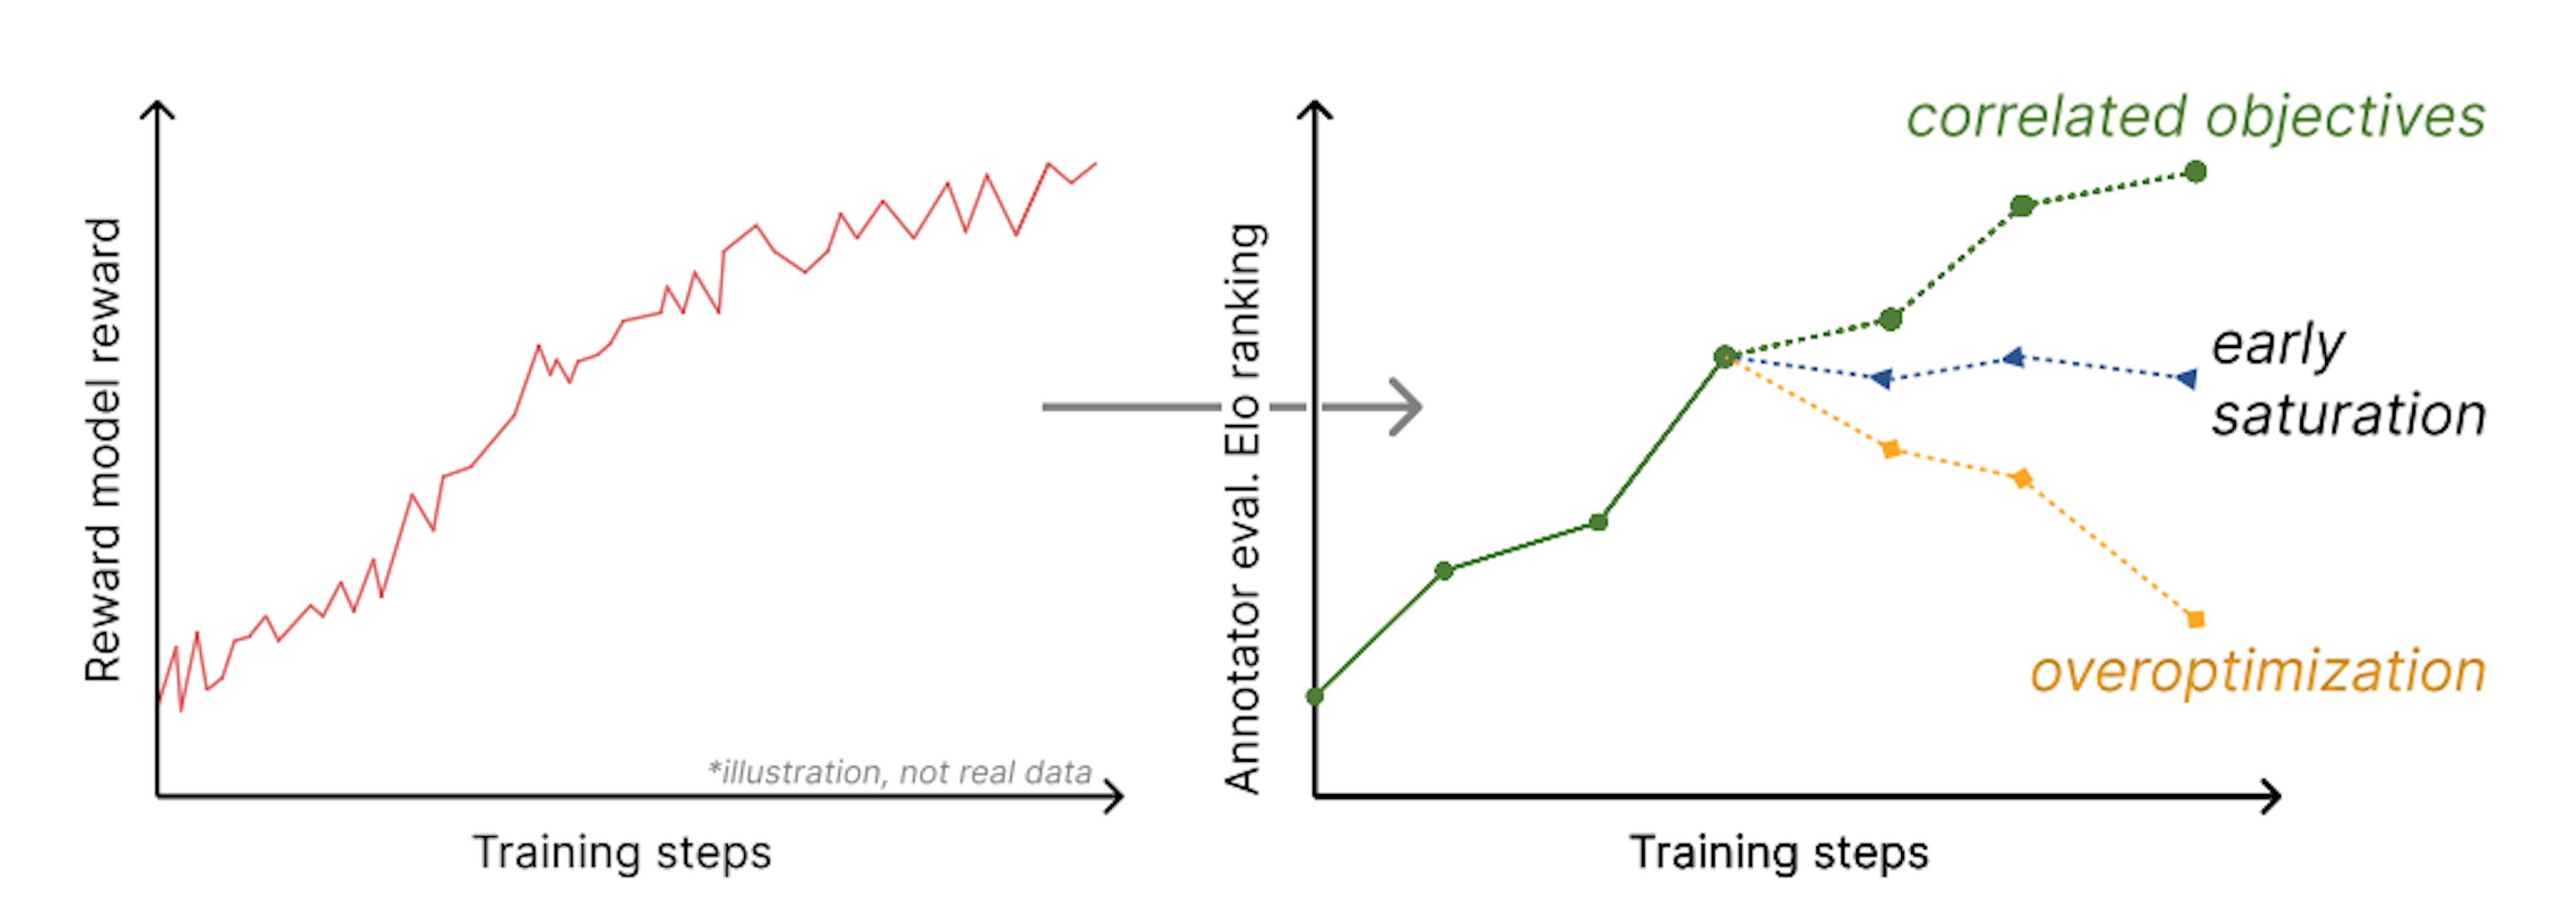 Figure 3: Illustrating the most likely visualization of objective mismatch in RLHF, the link between policy training anddownstream evaluation. Measuring the correlation between evaluation and RL training is crucial to understanding the